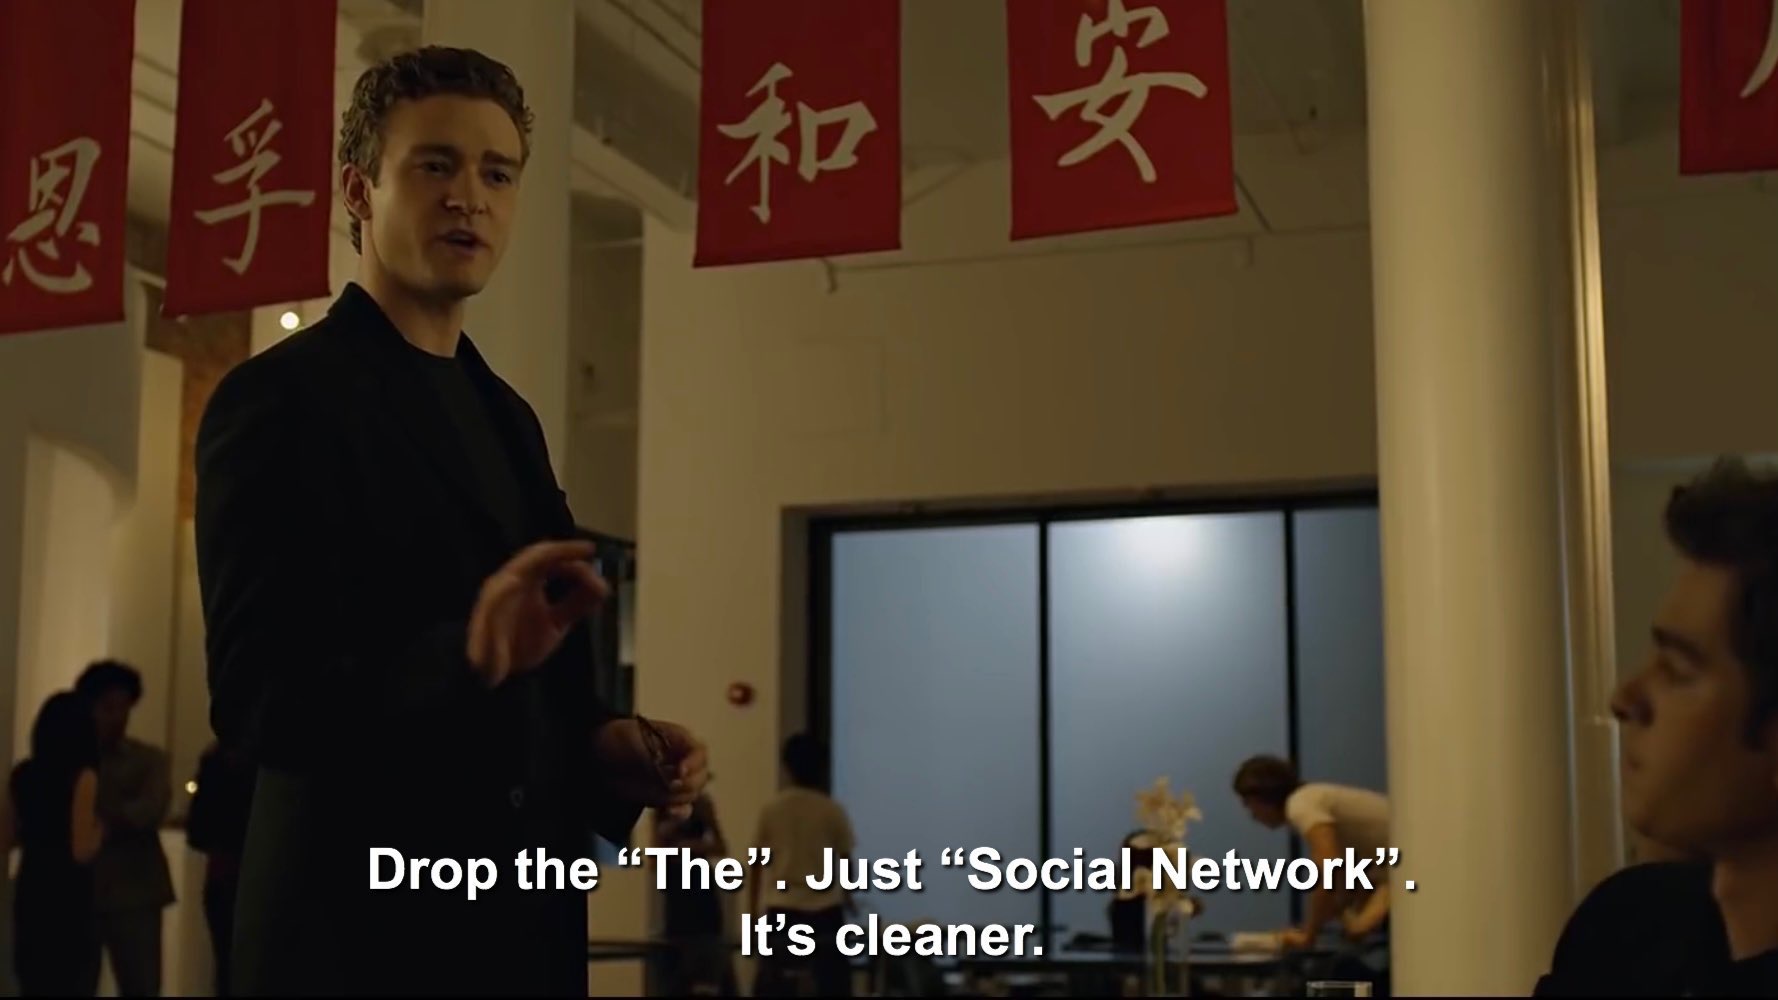 He Didn't Say That -Movie Titles in Movie Lines- social network just facebook - Drop the "The". Just "Social Network". It's cleaner.